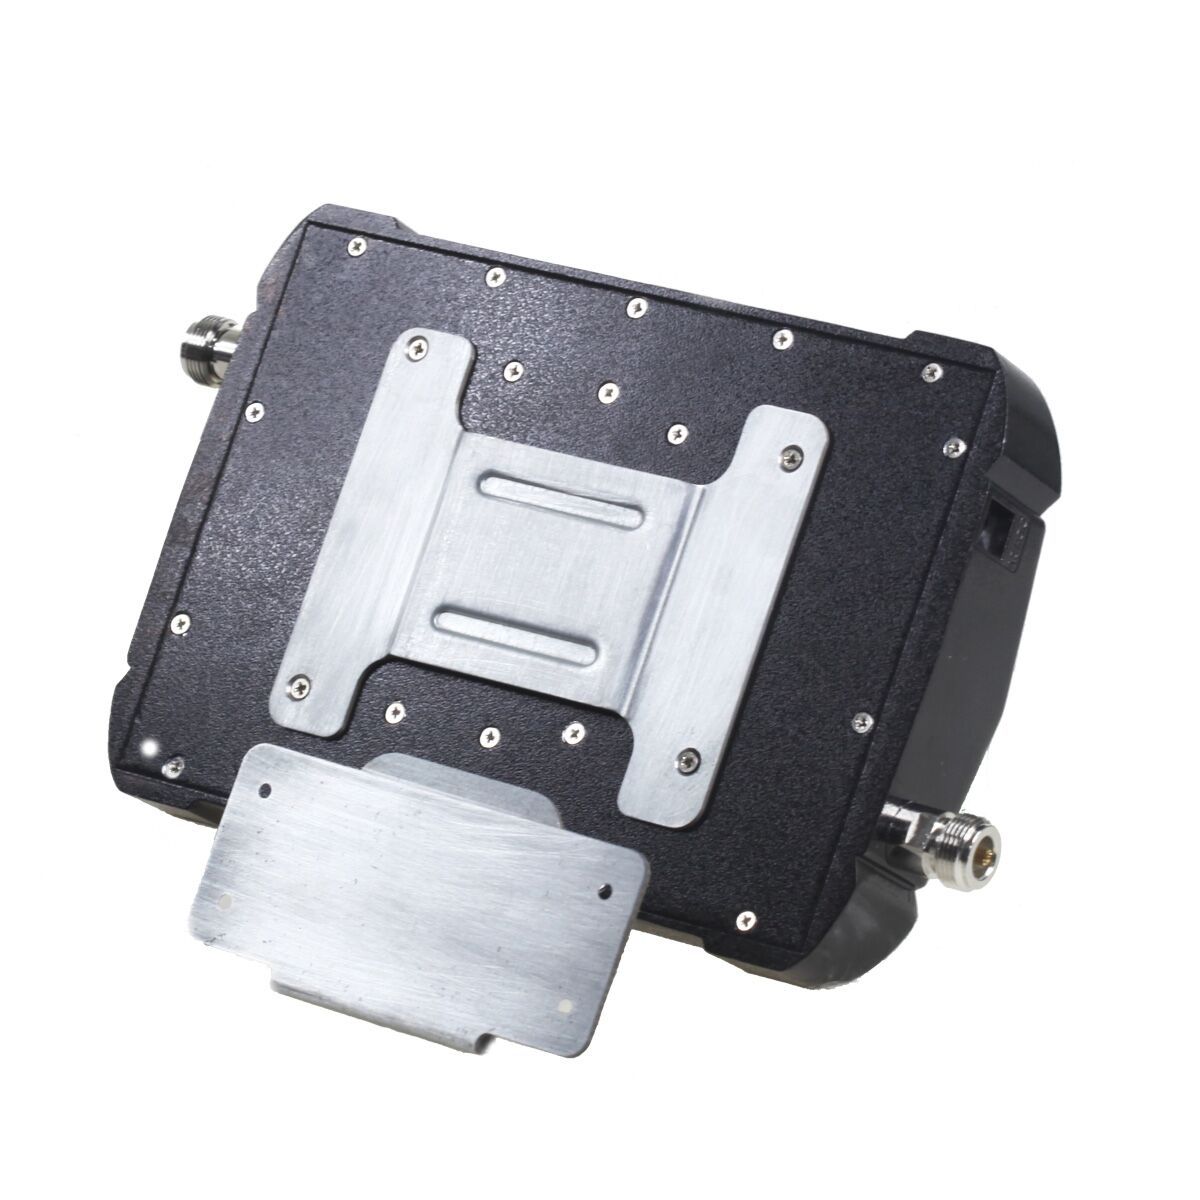 All Networks Pro Signal booster back bracket